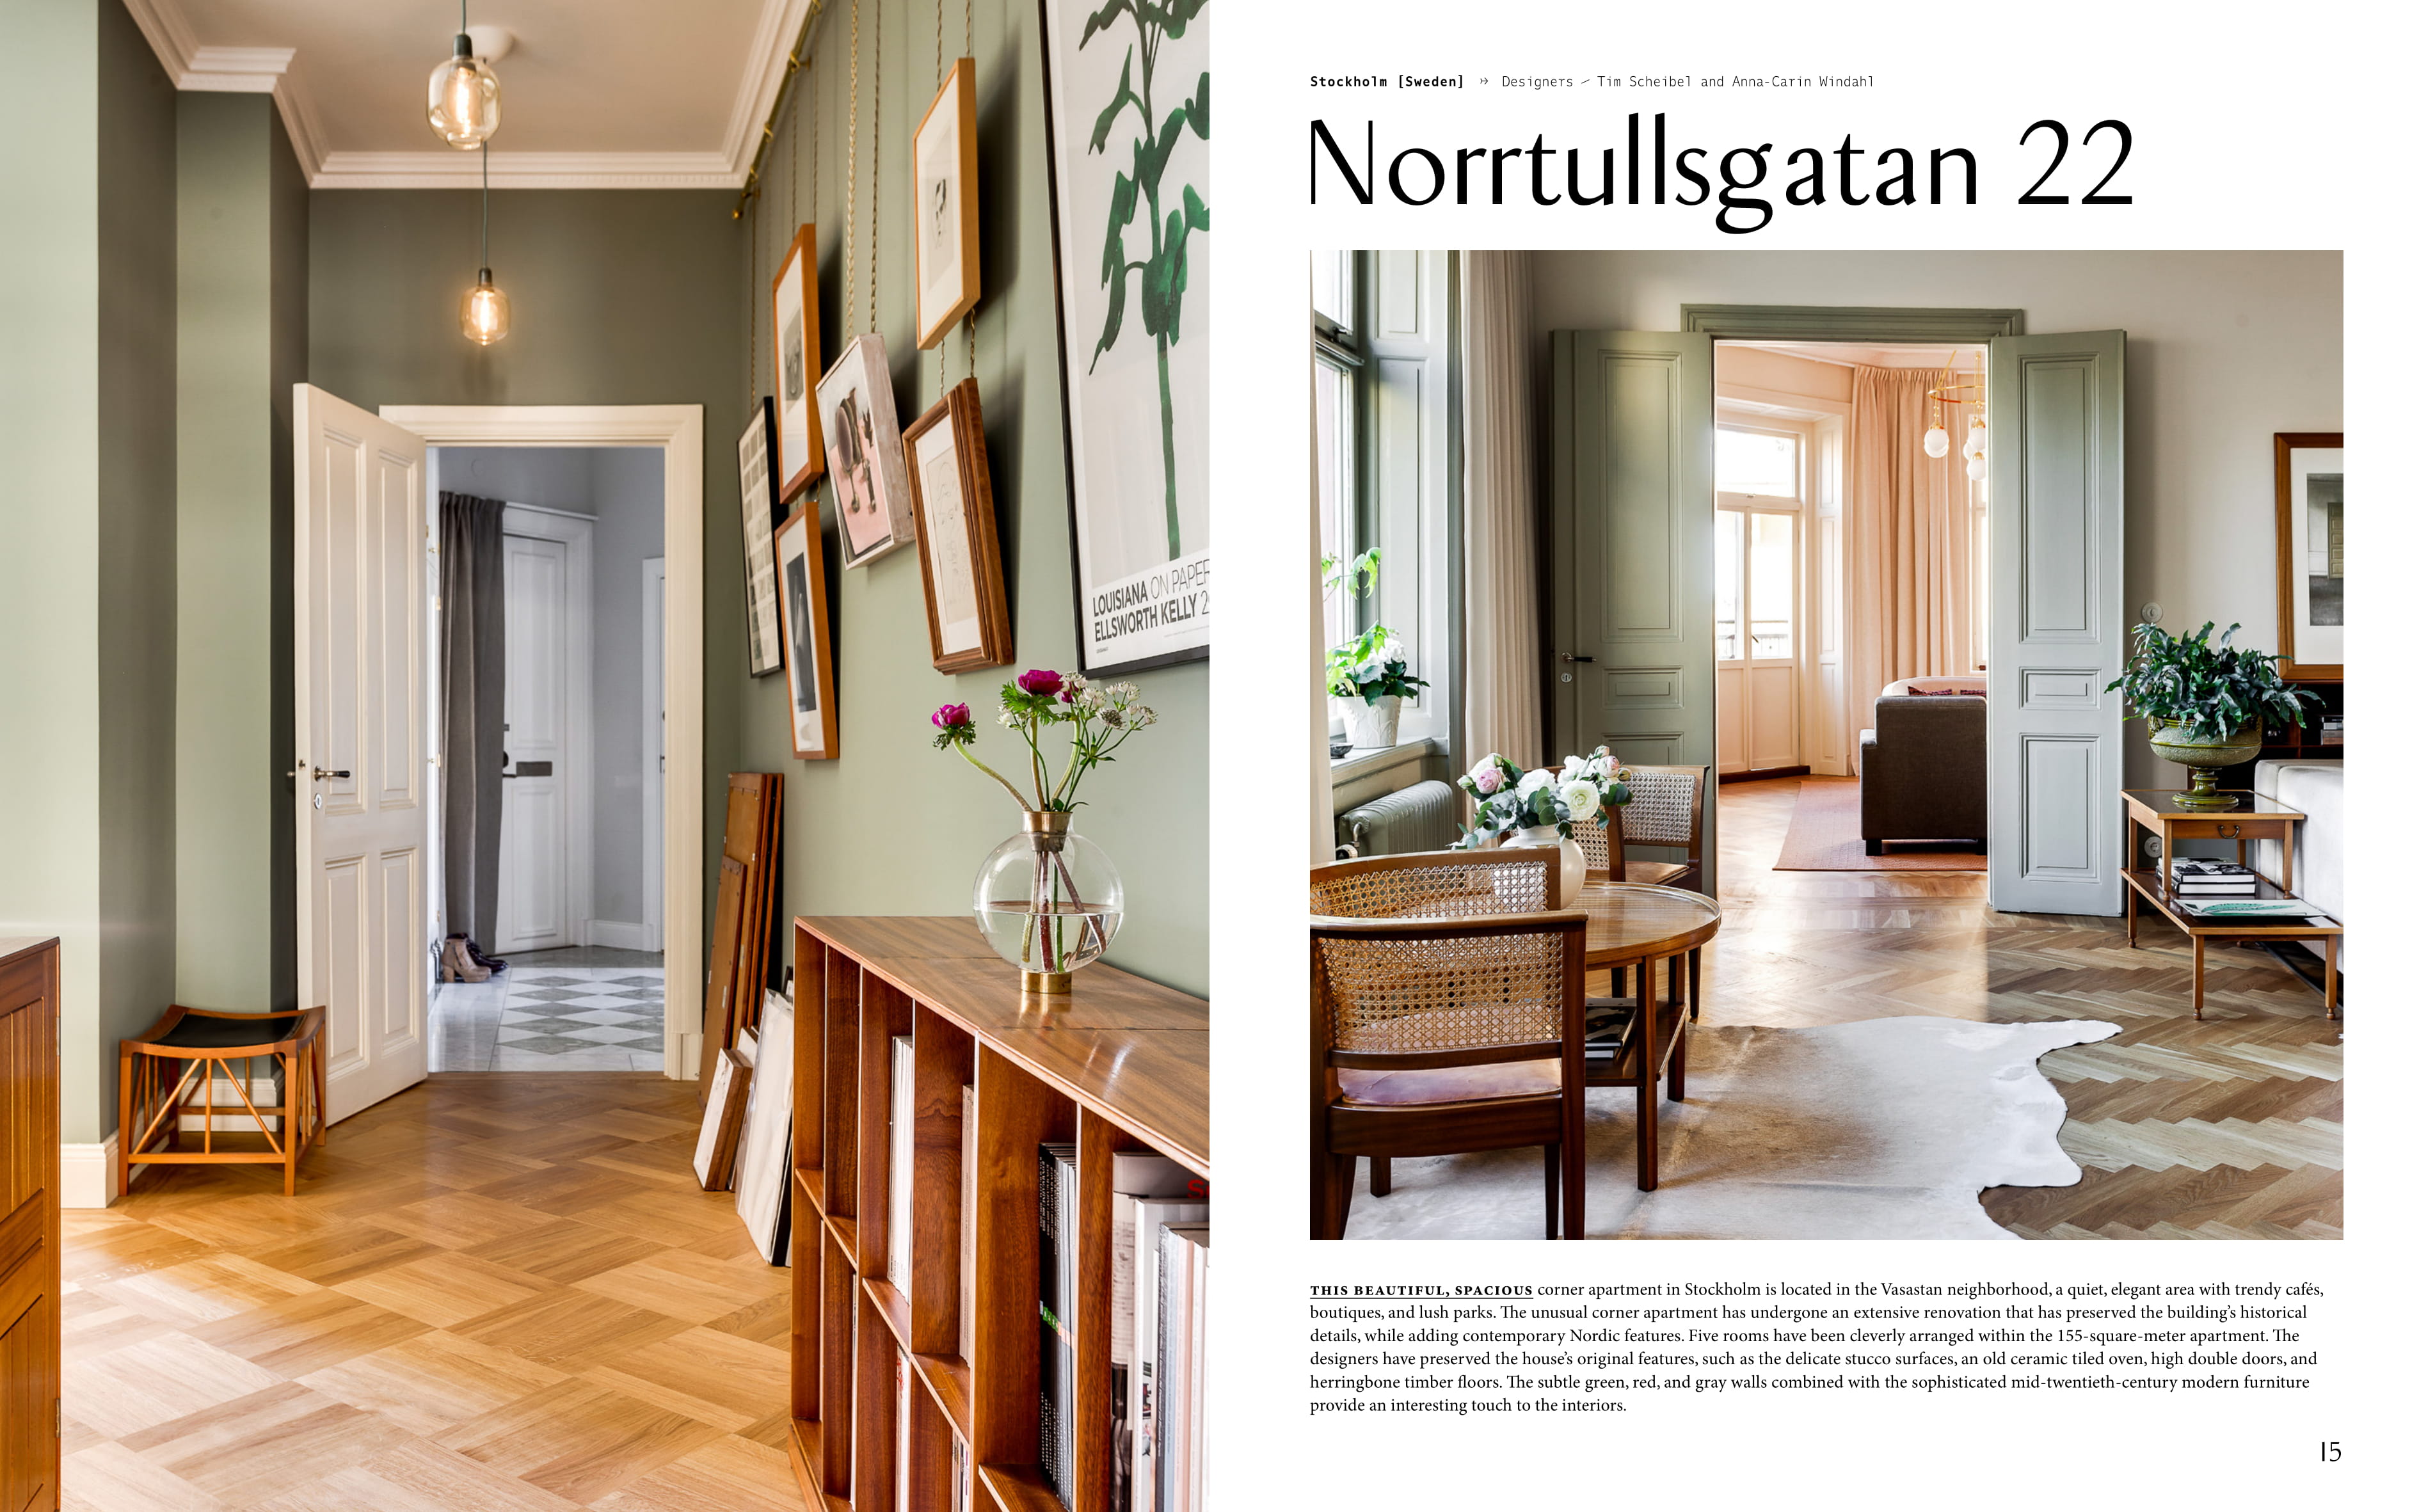 By Angel Trinidad from Scandinavia Dreaming: Nordic Homes, Interiors and Design copyright Gestalten 2016